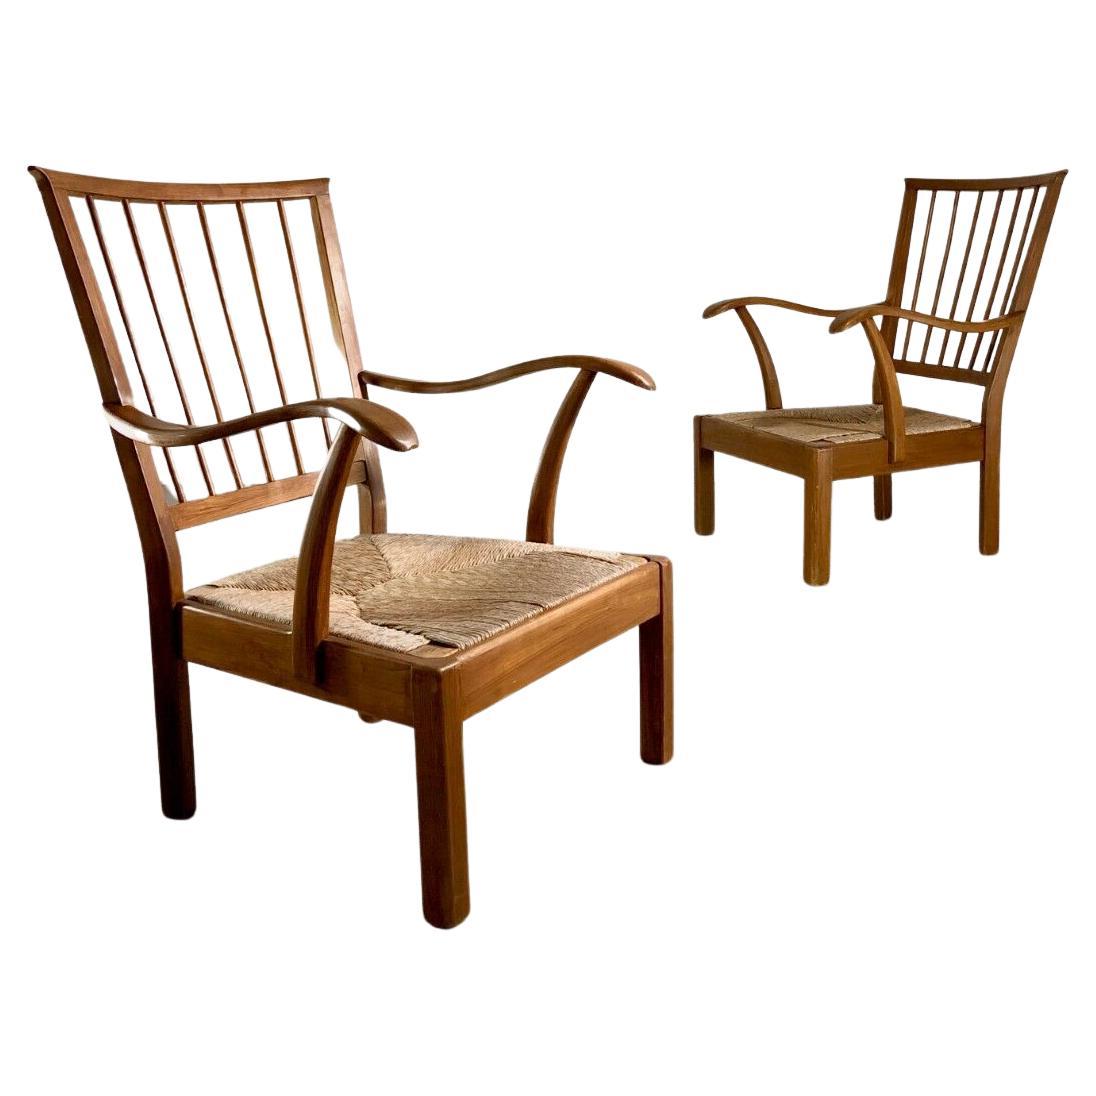 A Pair of SCANDINAVIAN Style, MID-CENTURY MODERN RUSTIC ARMCHAIRS, France 1950 For Sale